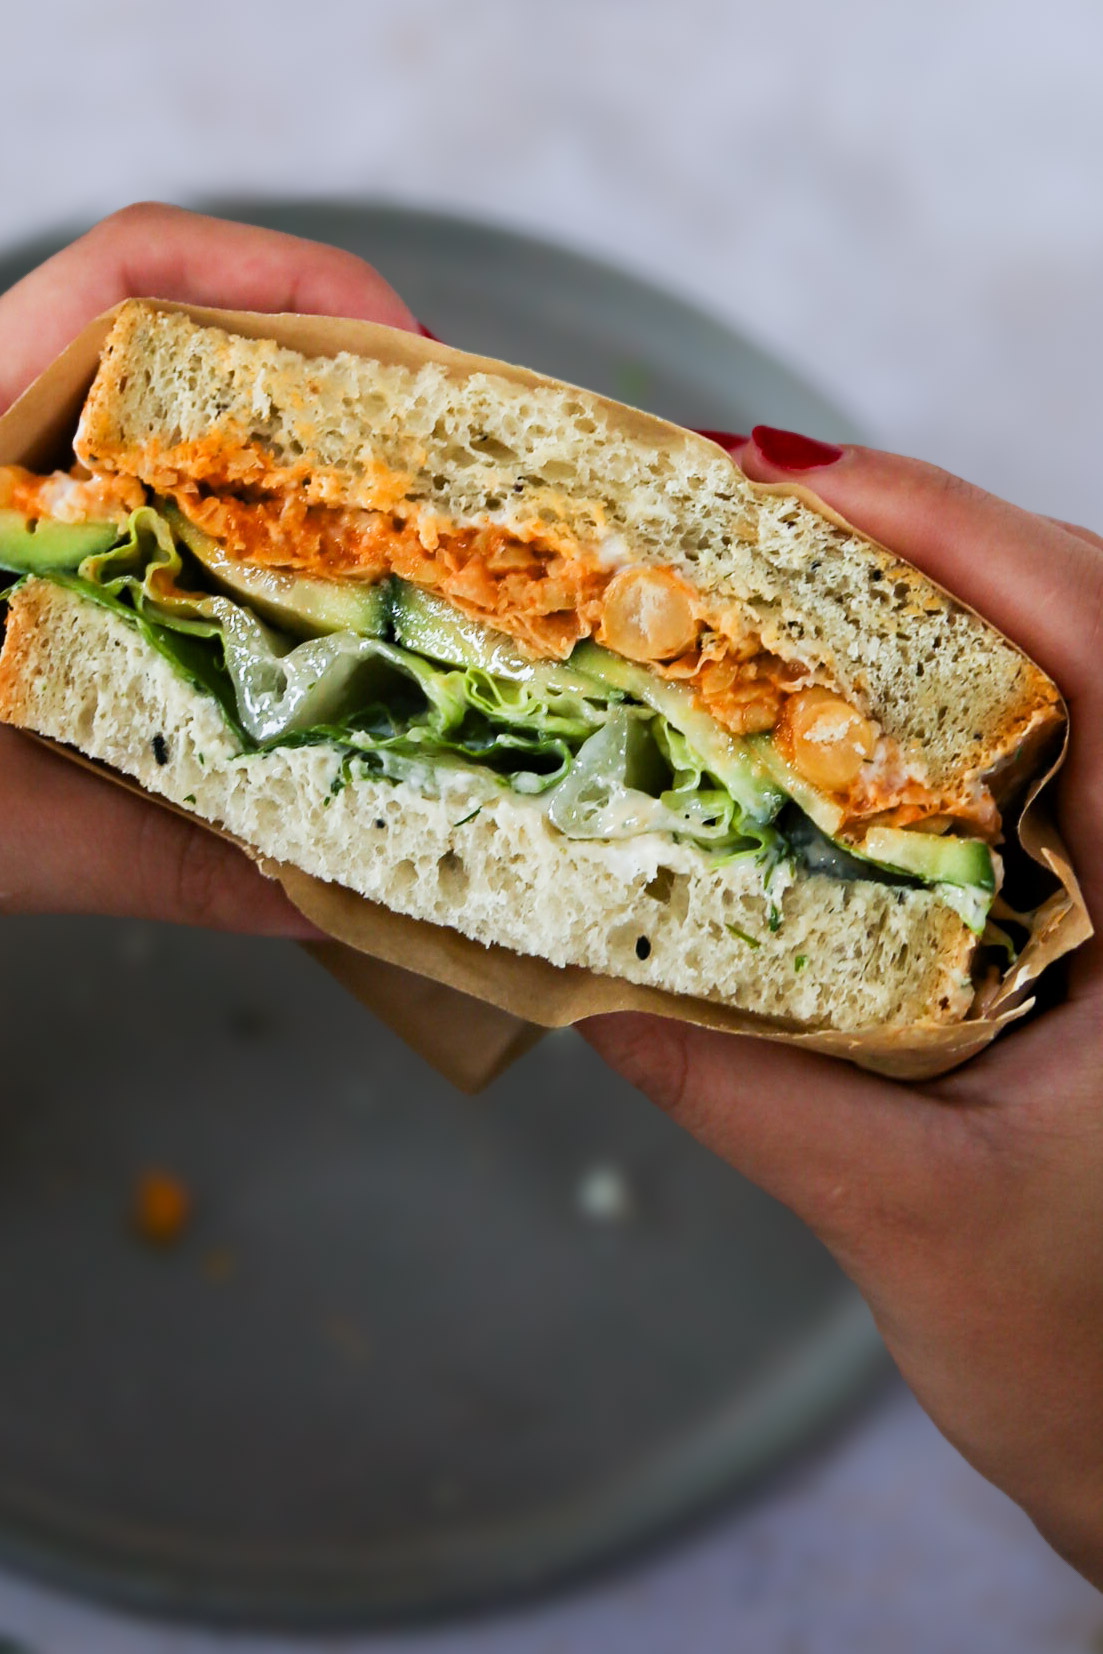 A close-up of a sandwich being held by two hands. The sandwich, featuring smashed chickpeas, consists of two thick slices of bread filled with leafy greens and cucumber slices. It is partially wrapped in brown paper. The background is a blurred, gray surface.